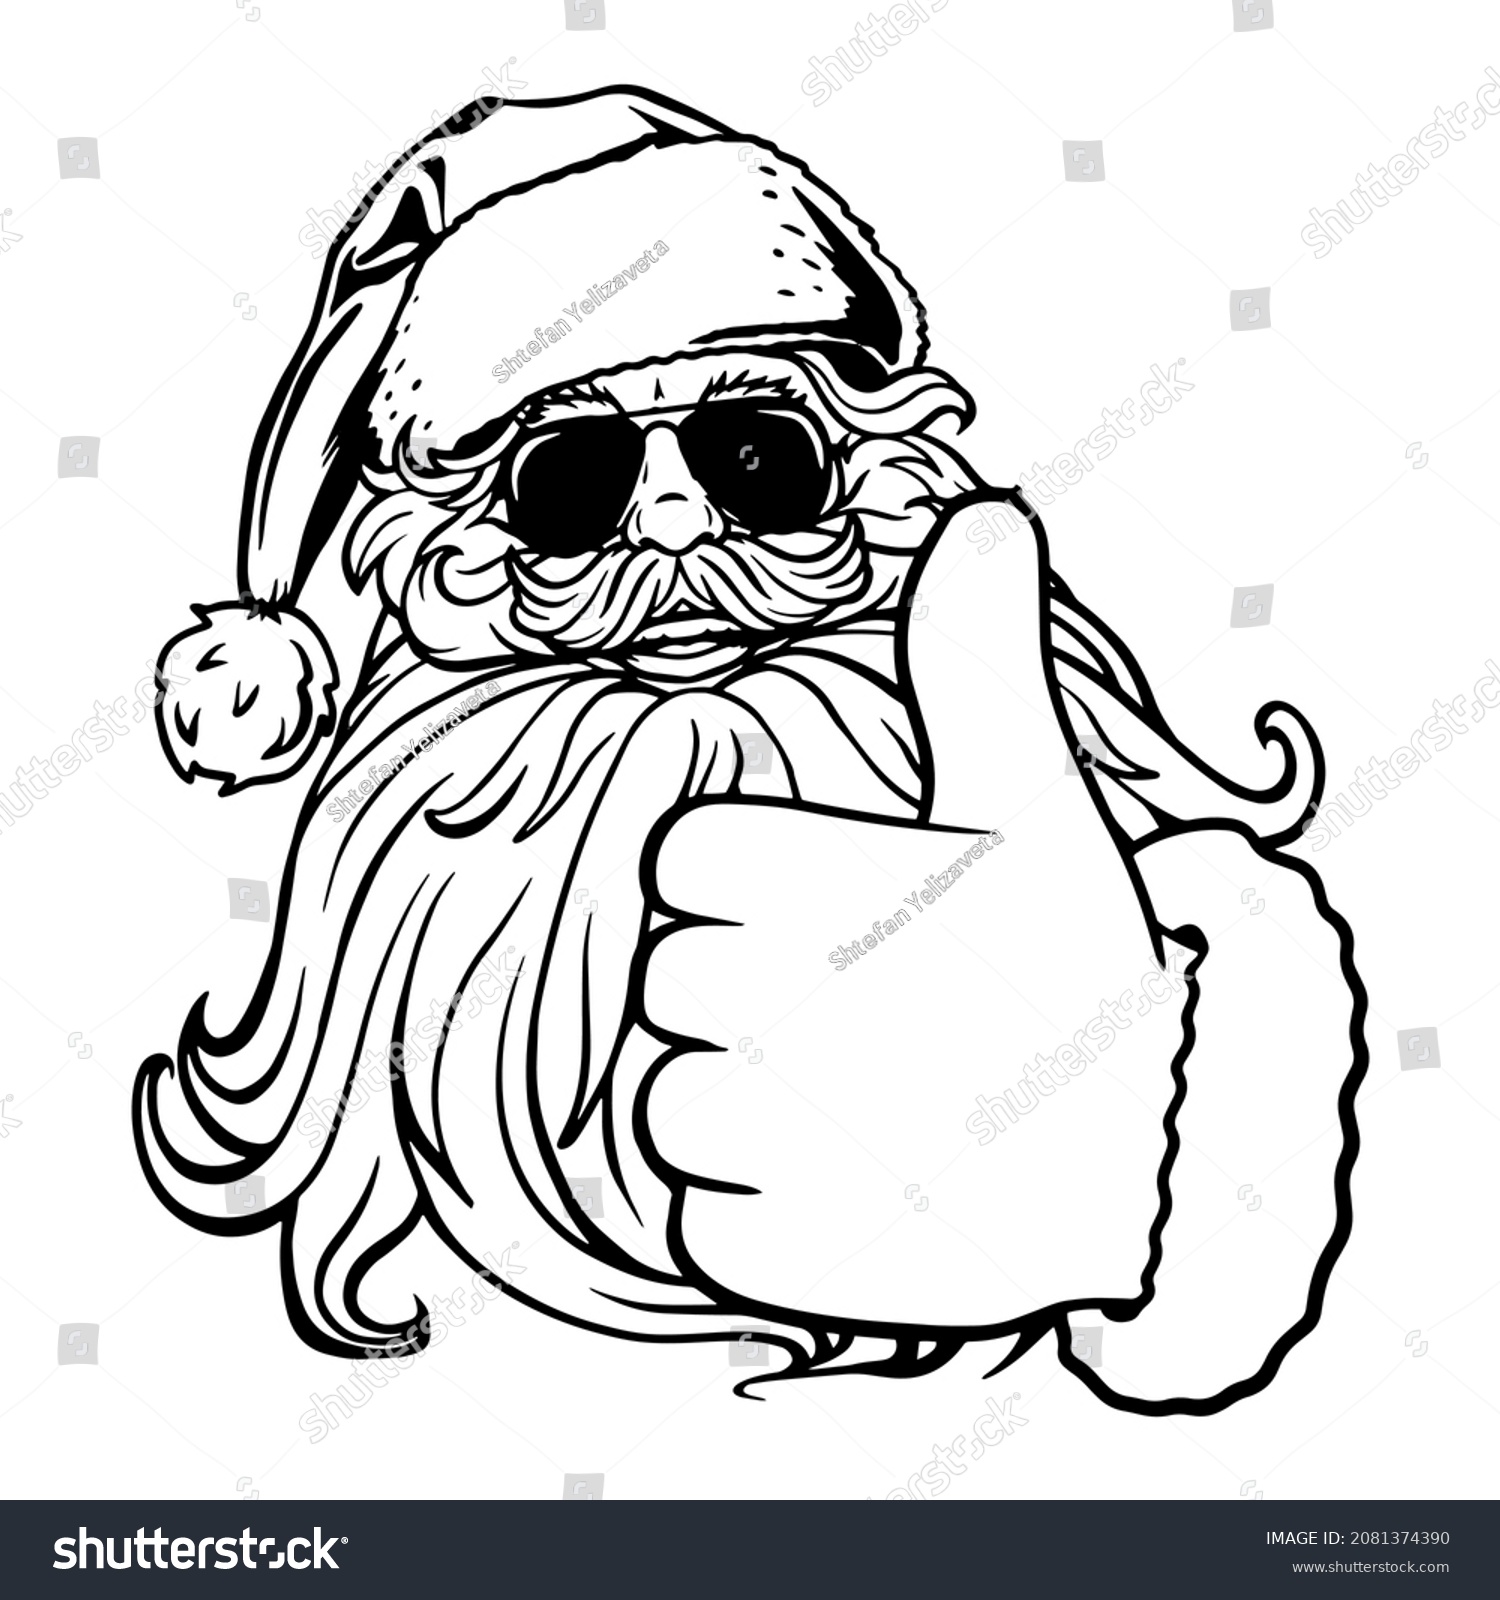 SVG of Santa Like with Sunglasses SVG,Cool Santa Santa head,Santa clipart,Santa Face svg,Santa Claus Christmas cutting and print file. Vector illustration svg